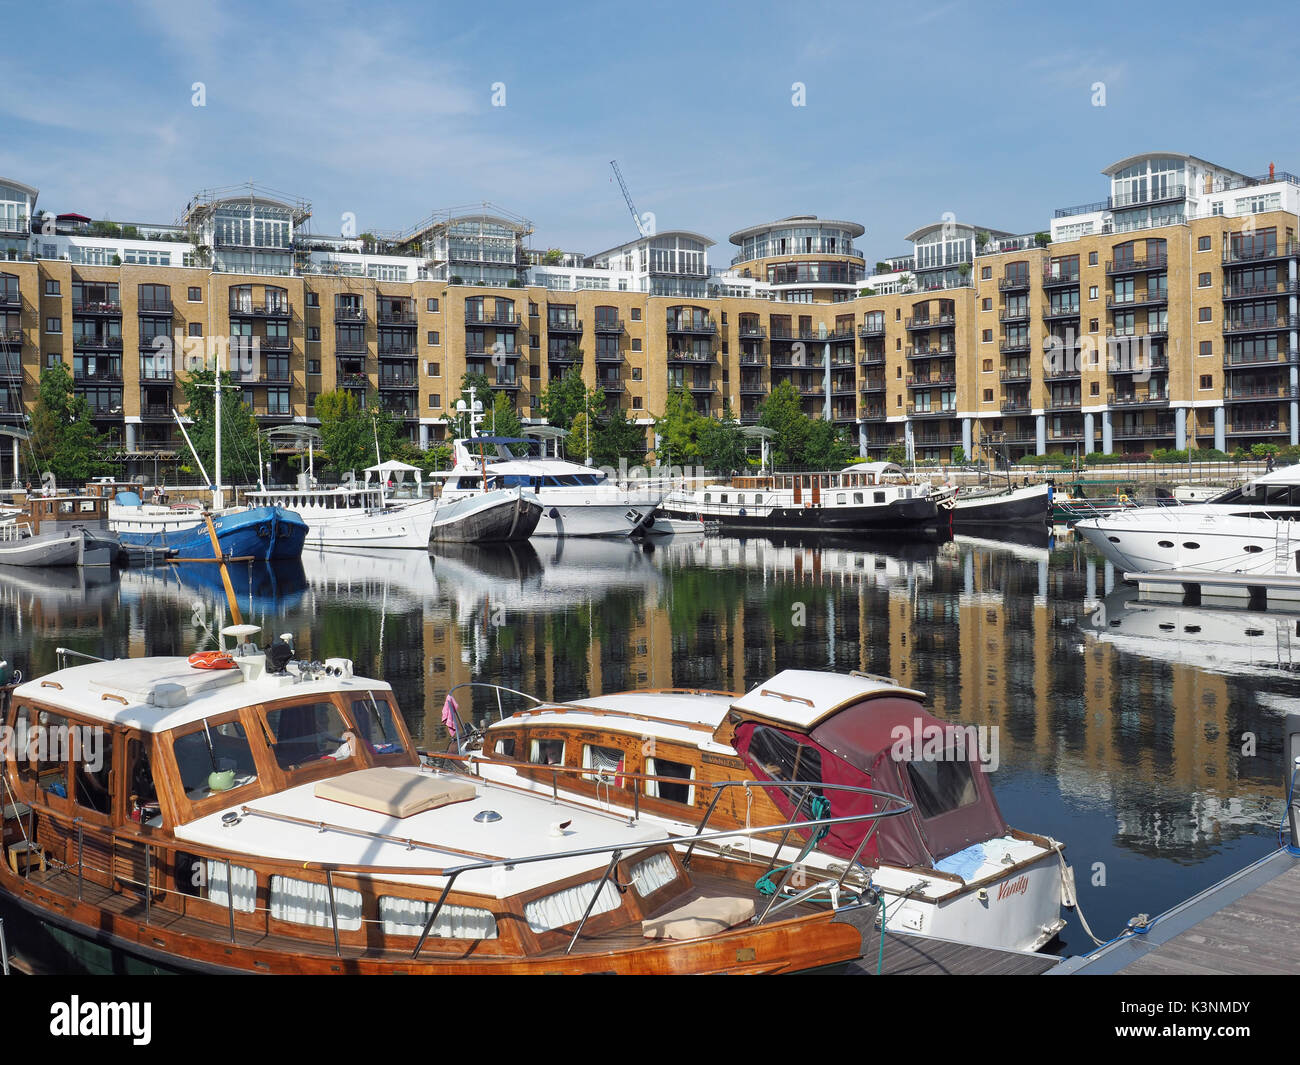 View of boats moored in St Katharine Docks in Central London UK Stock Photo